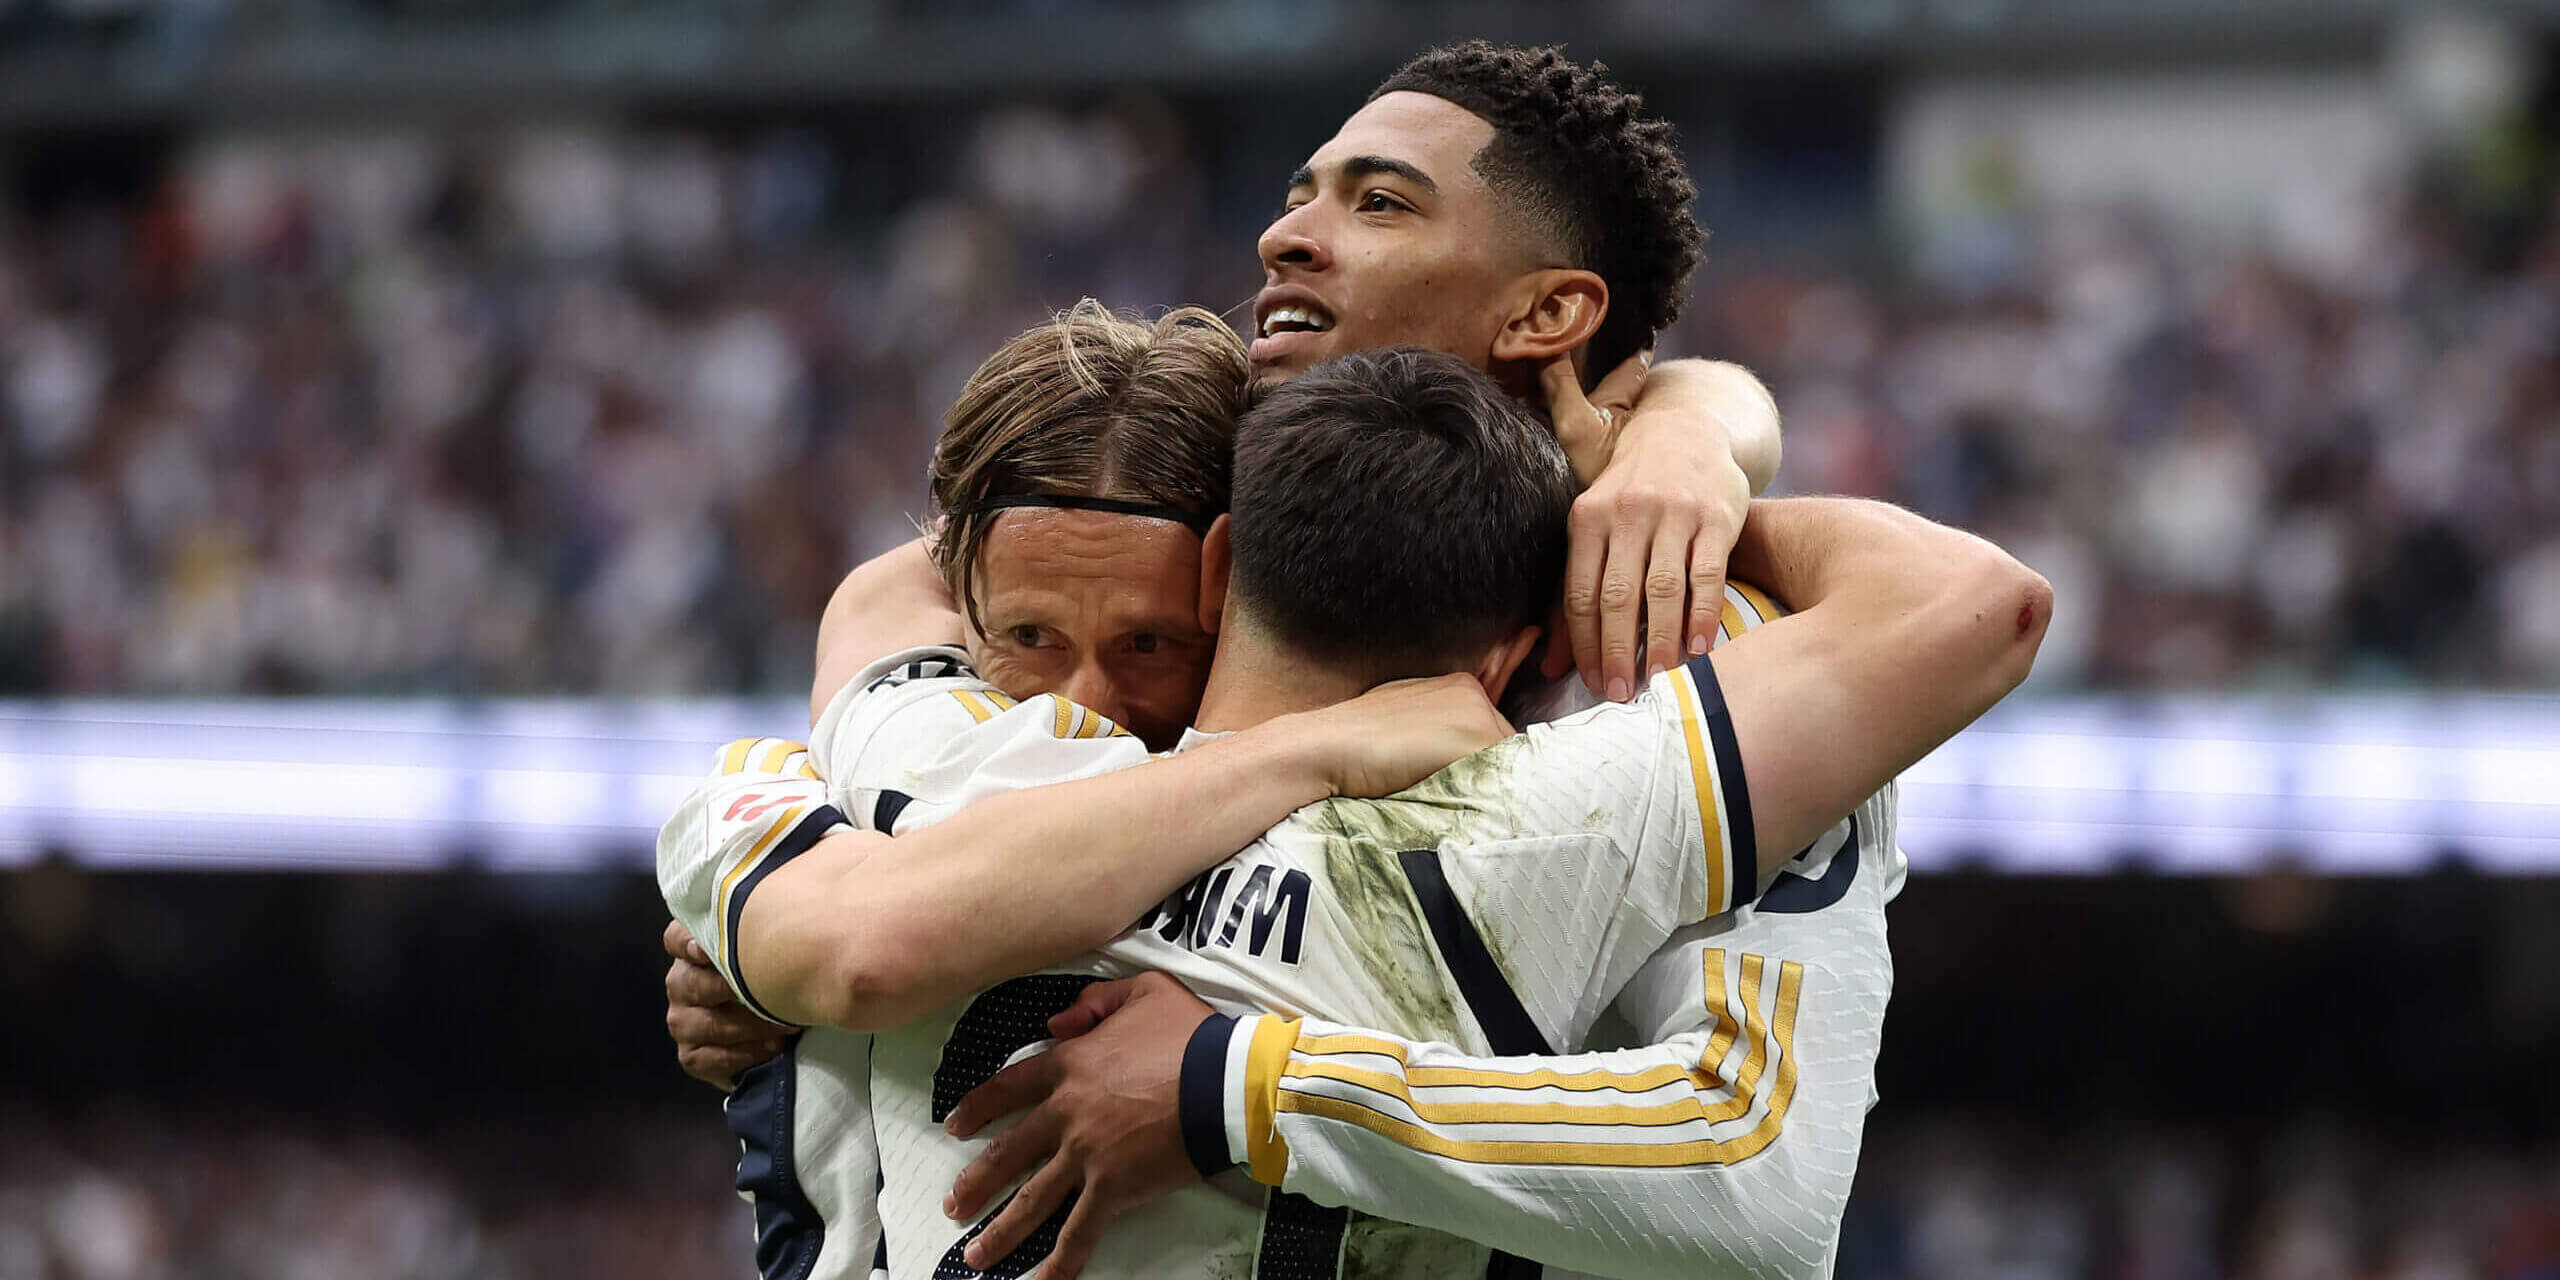 Real Madrid and Carlo Ancelotti have built a squad of selfless superstars